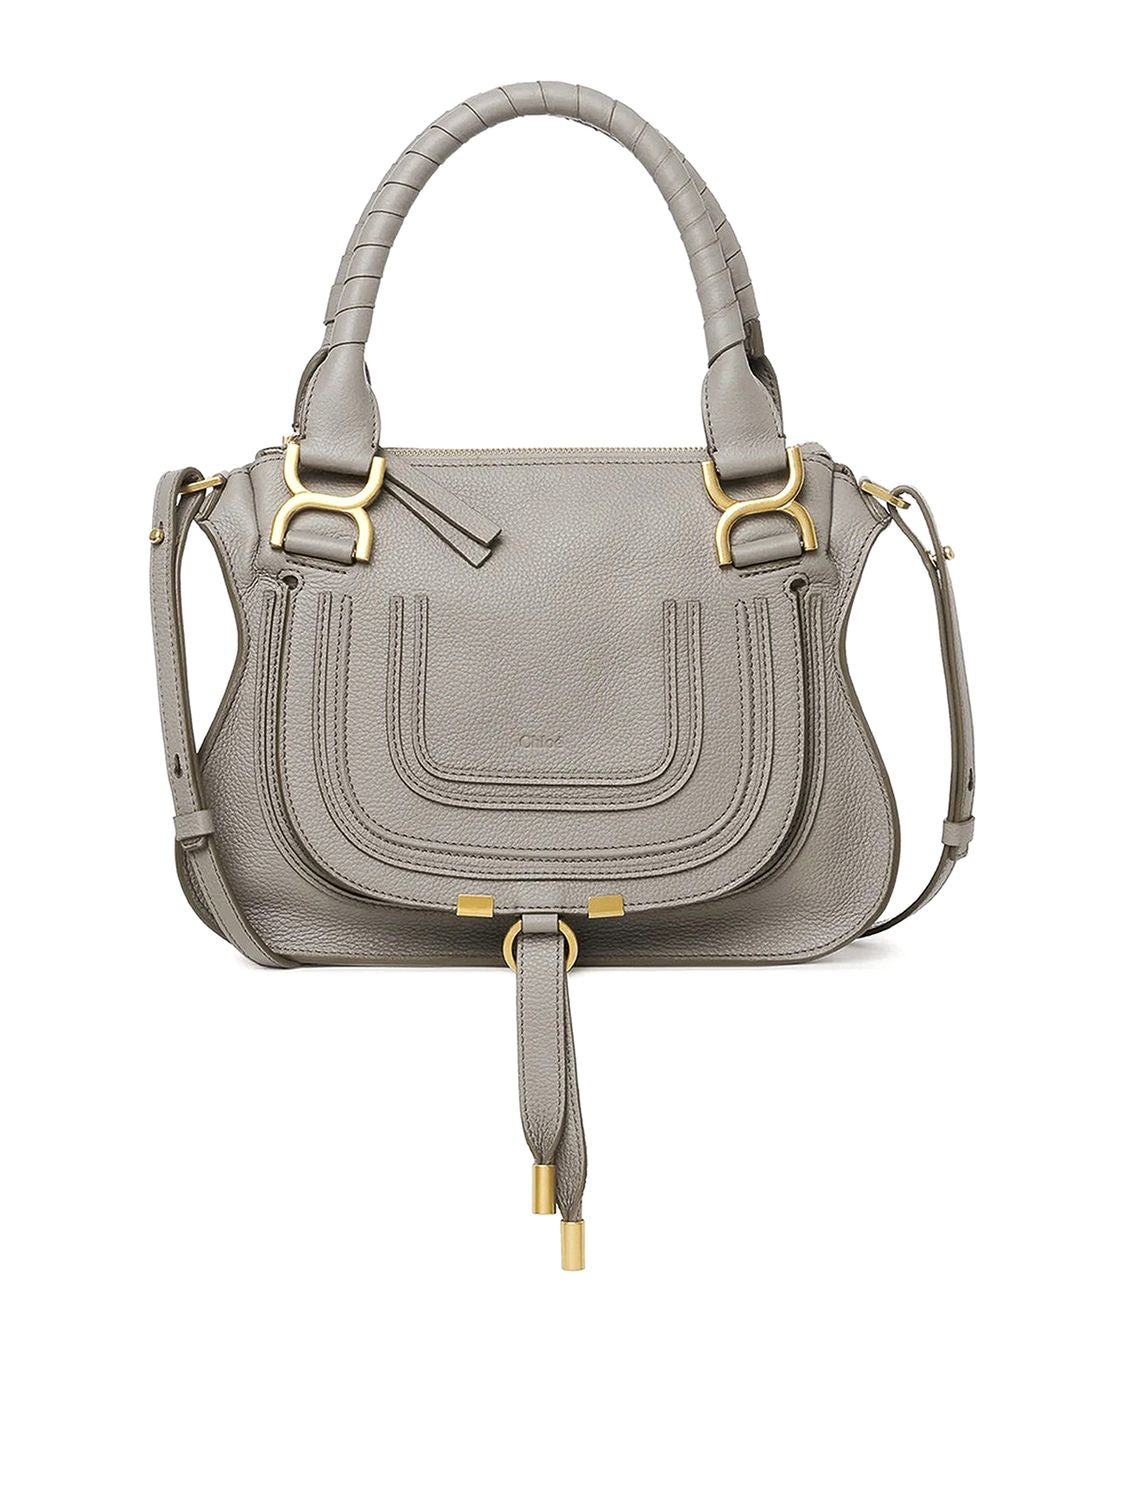 CHLOÉ Women's Marcie Small Double Carry Shoulder Bag in Cashmere Grey, FW23 Collection, 100% Genuine Leather